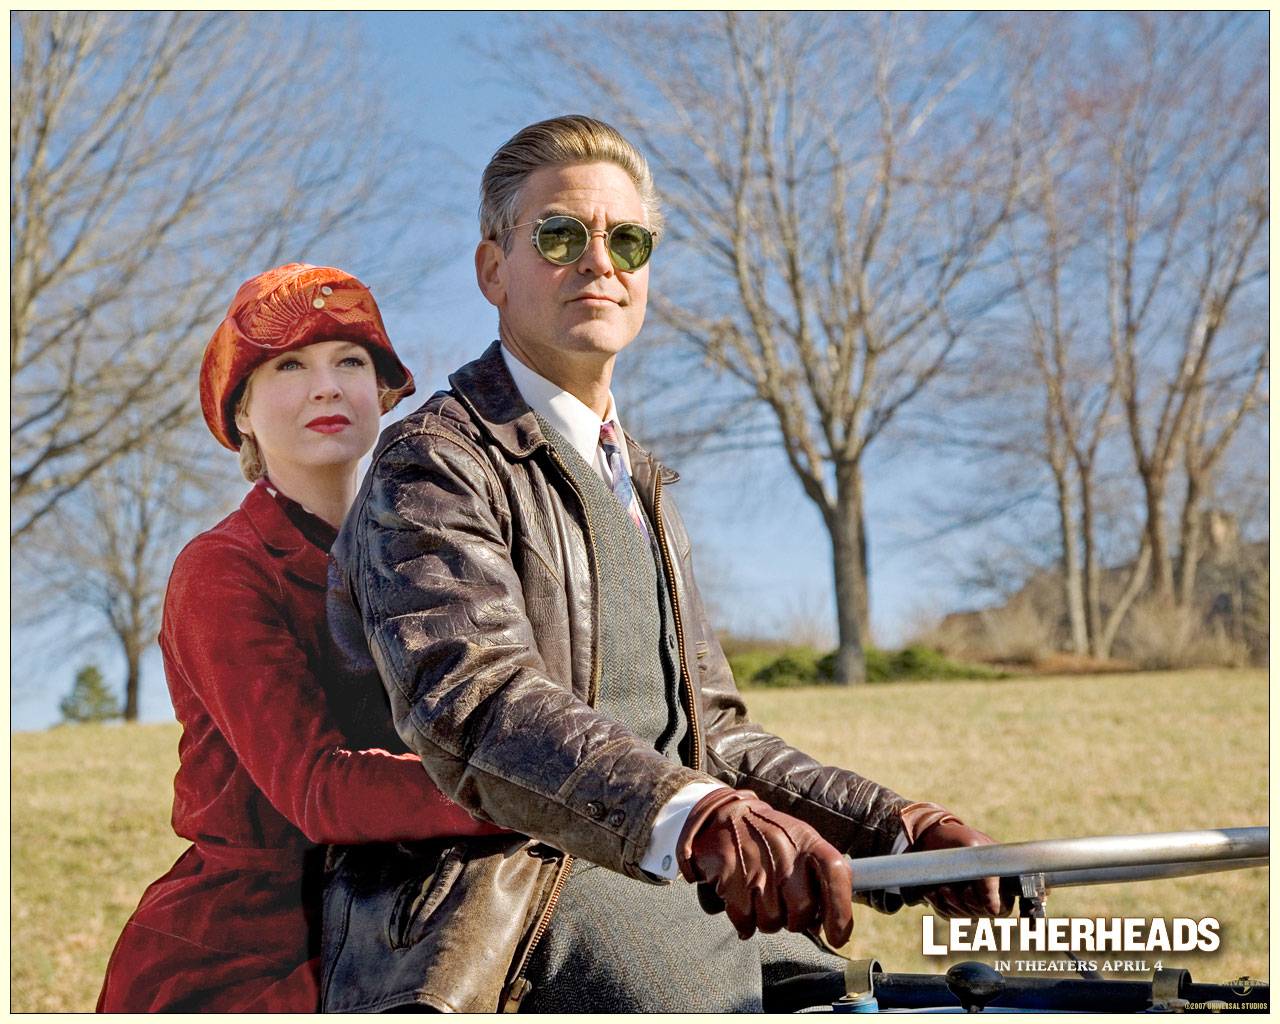 Here's Proof That Clooney Only Gets Better With Age Leatherheads-upcoming-movies-843599_1280_1024